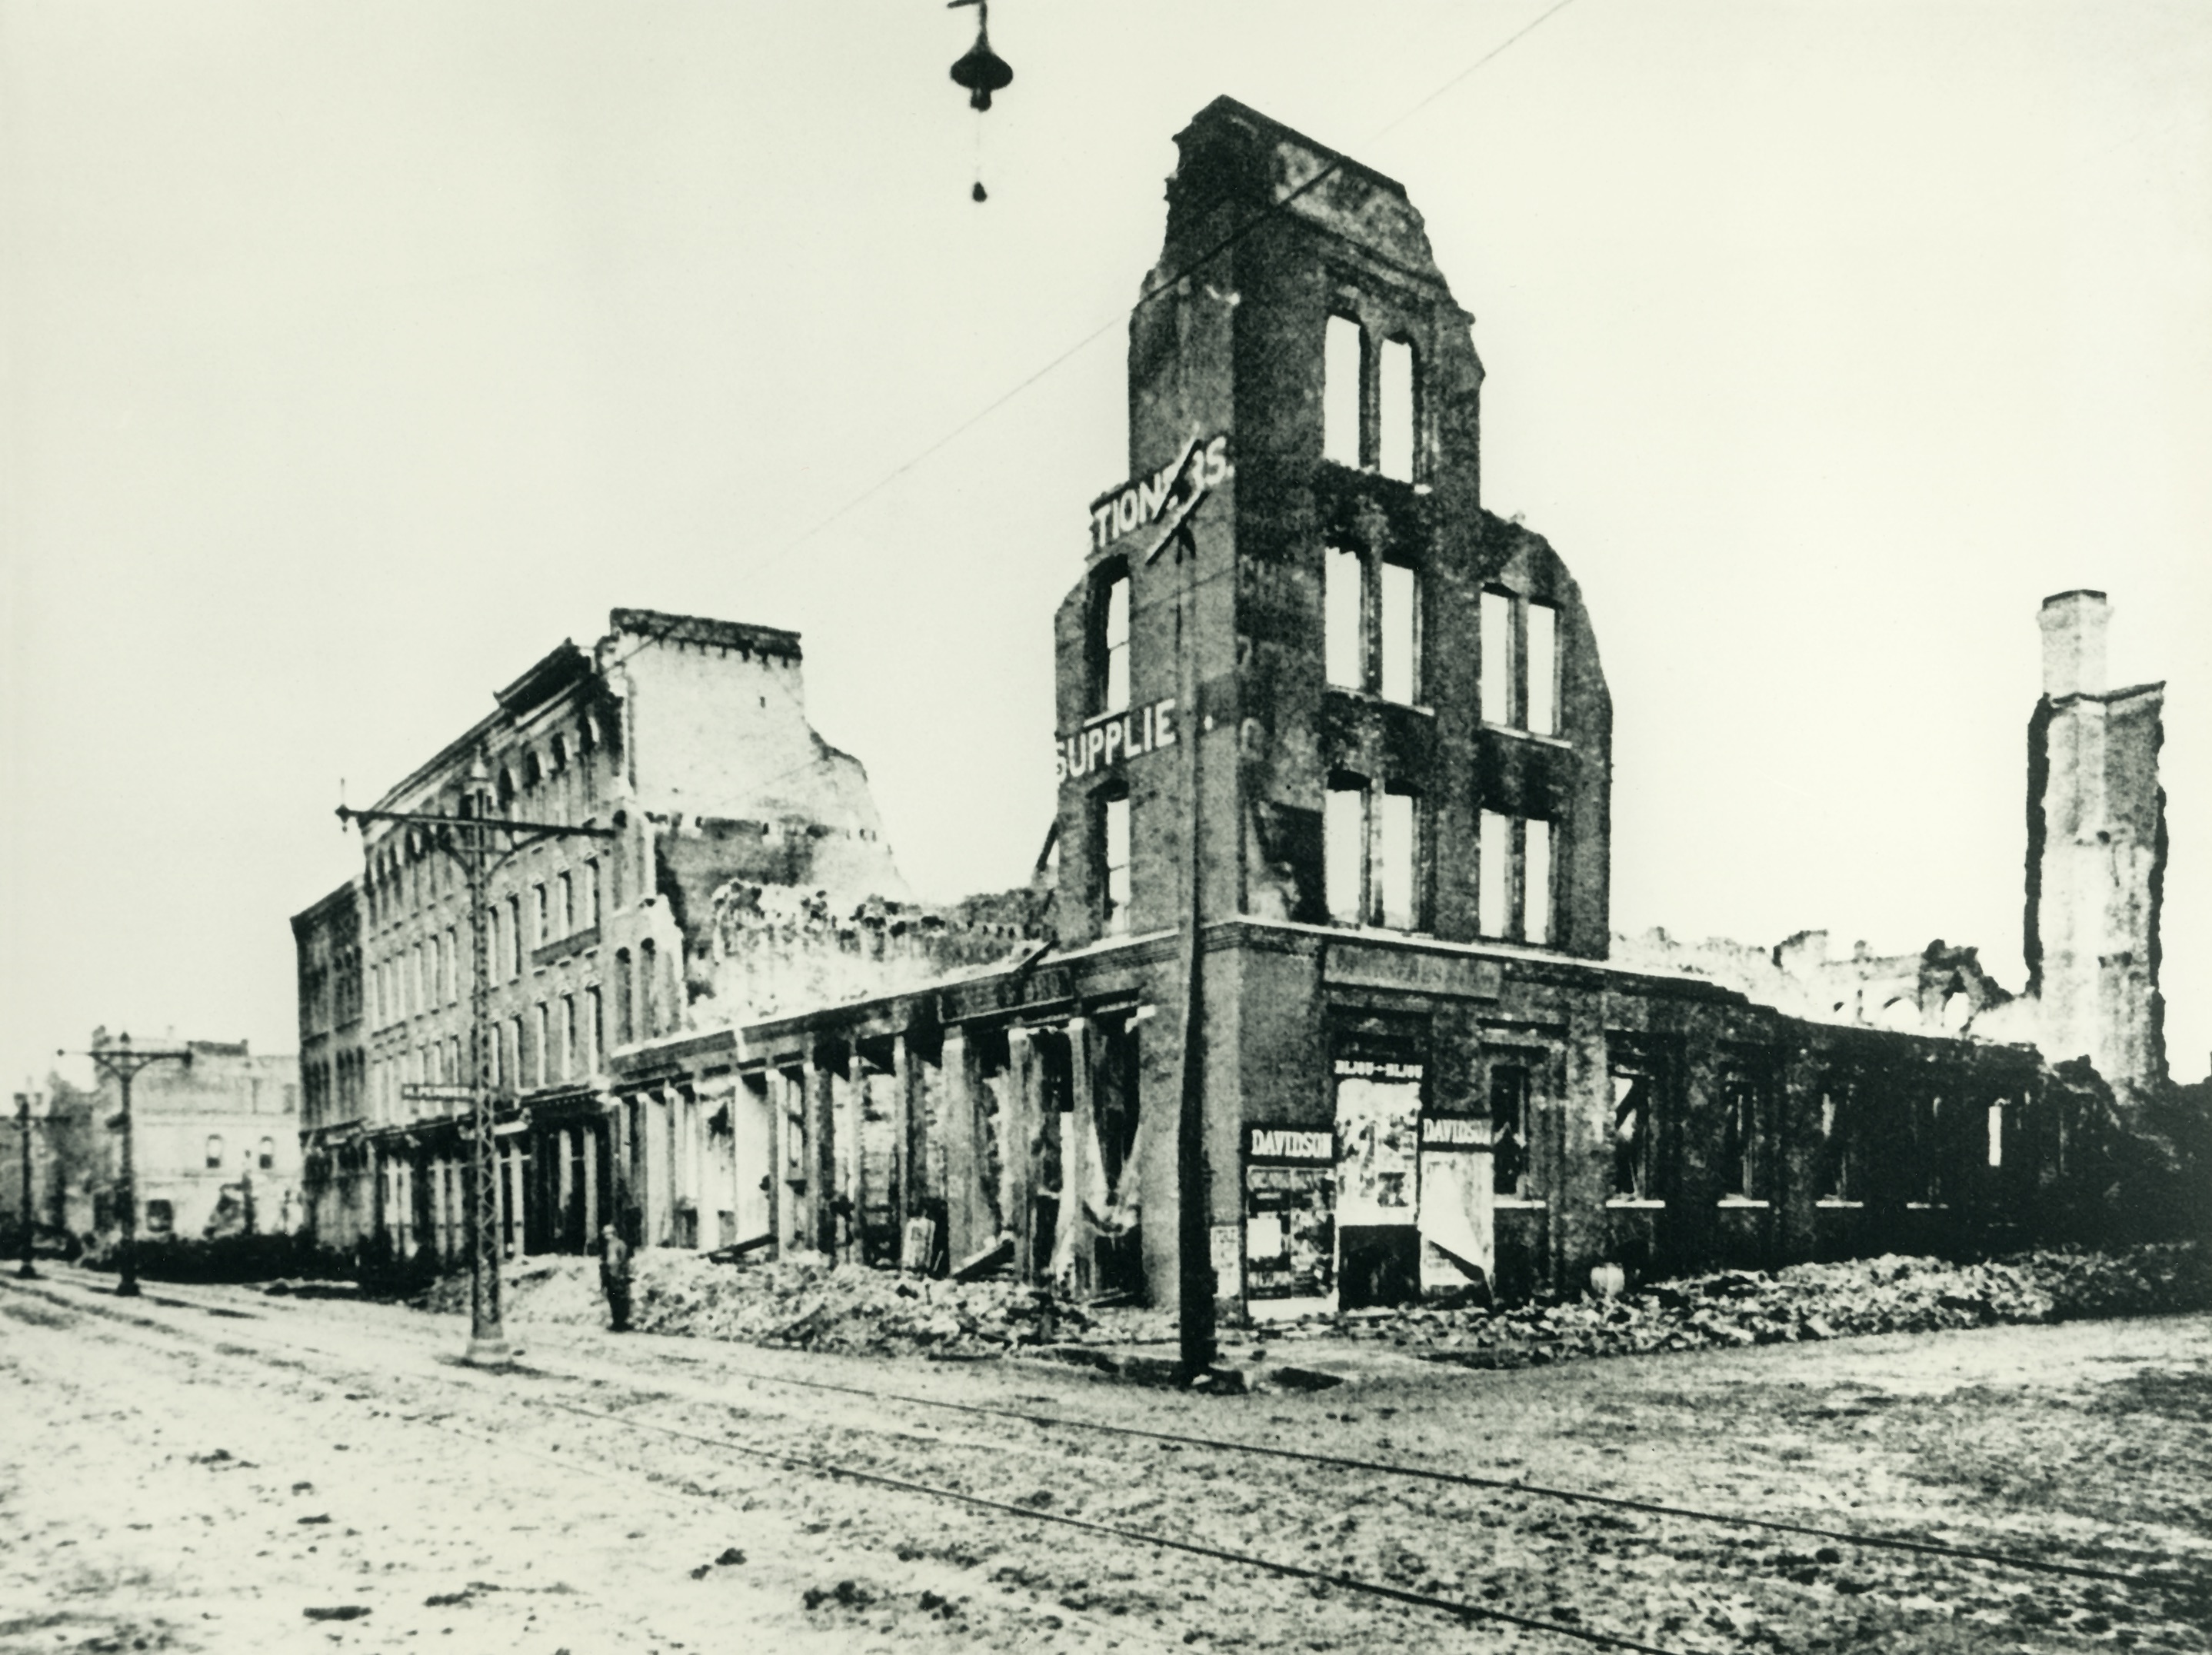 The fire in the Third Ward in 1892 demolished more than 440 buildings and displaced 2,500 people from the neighborhood.